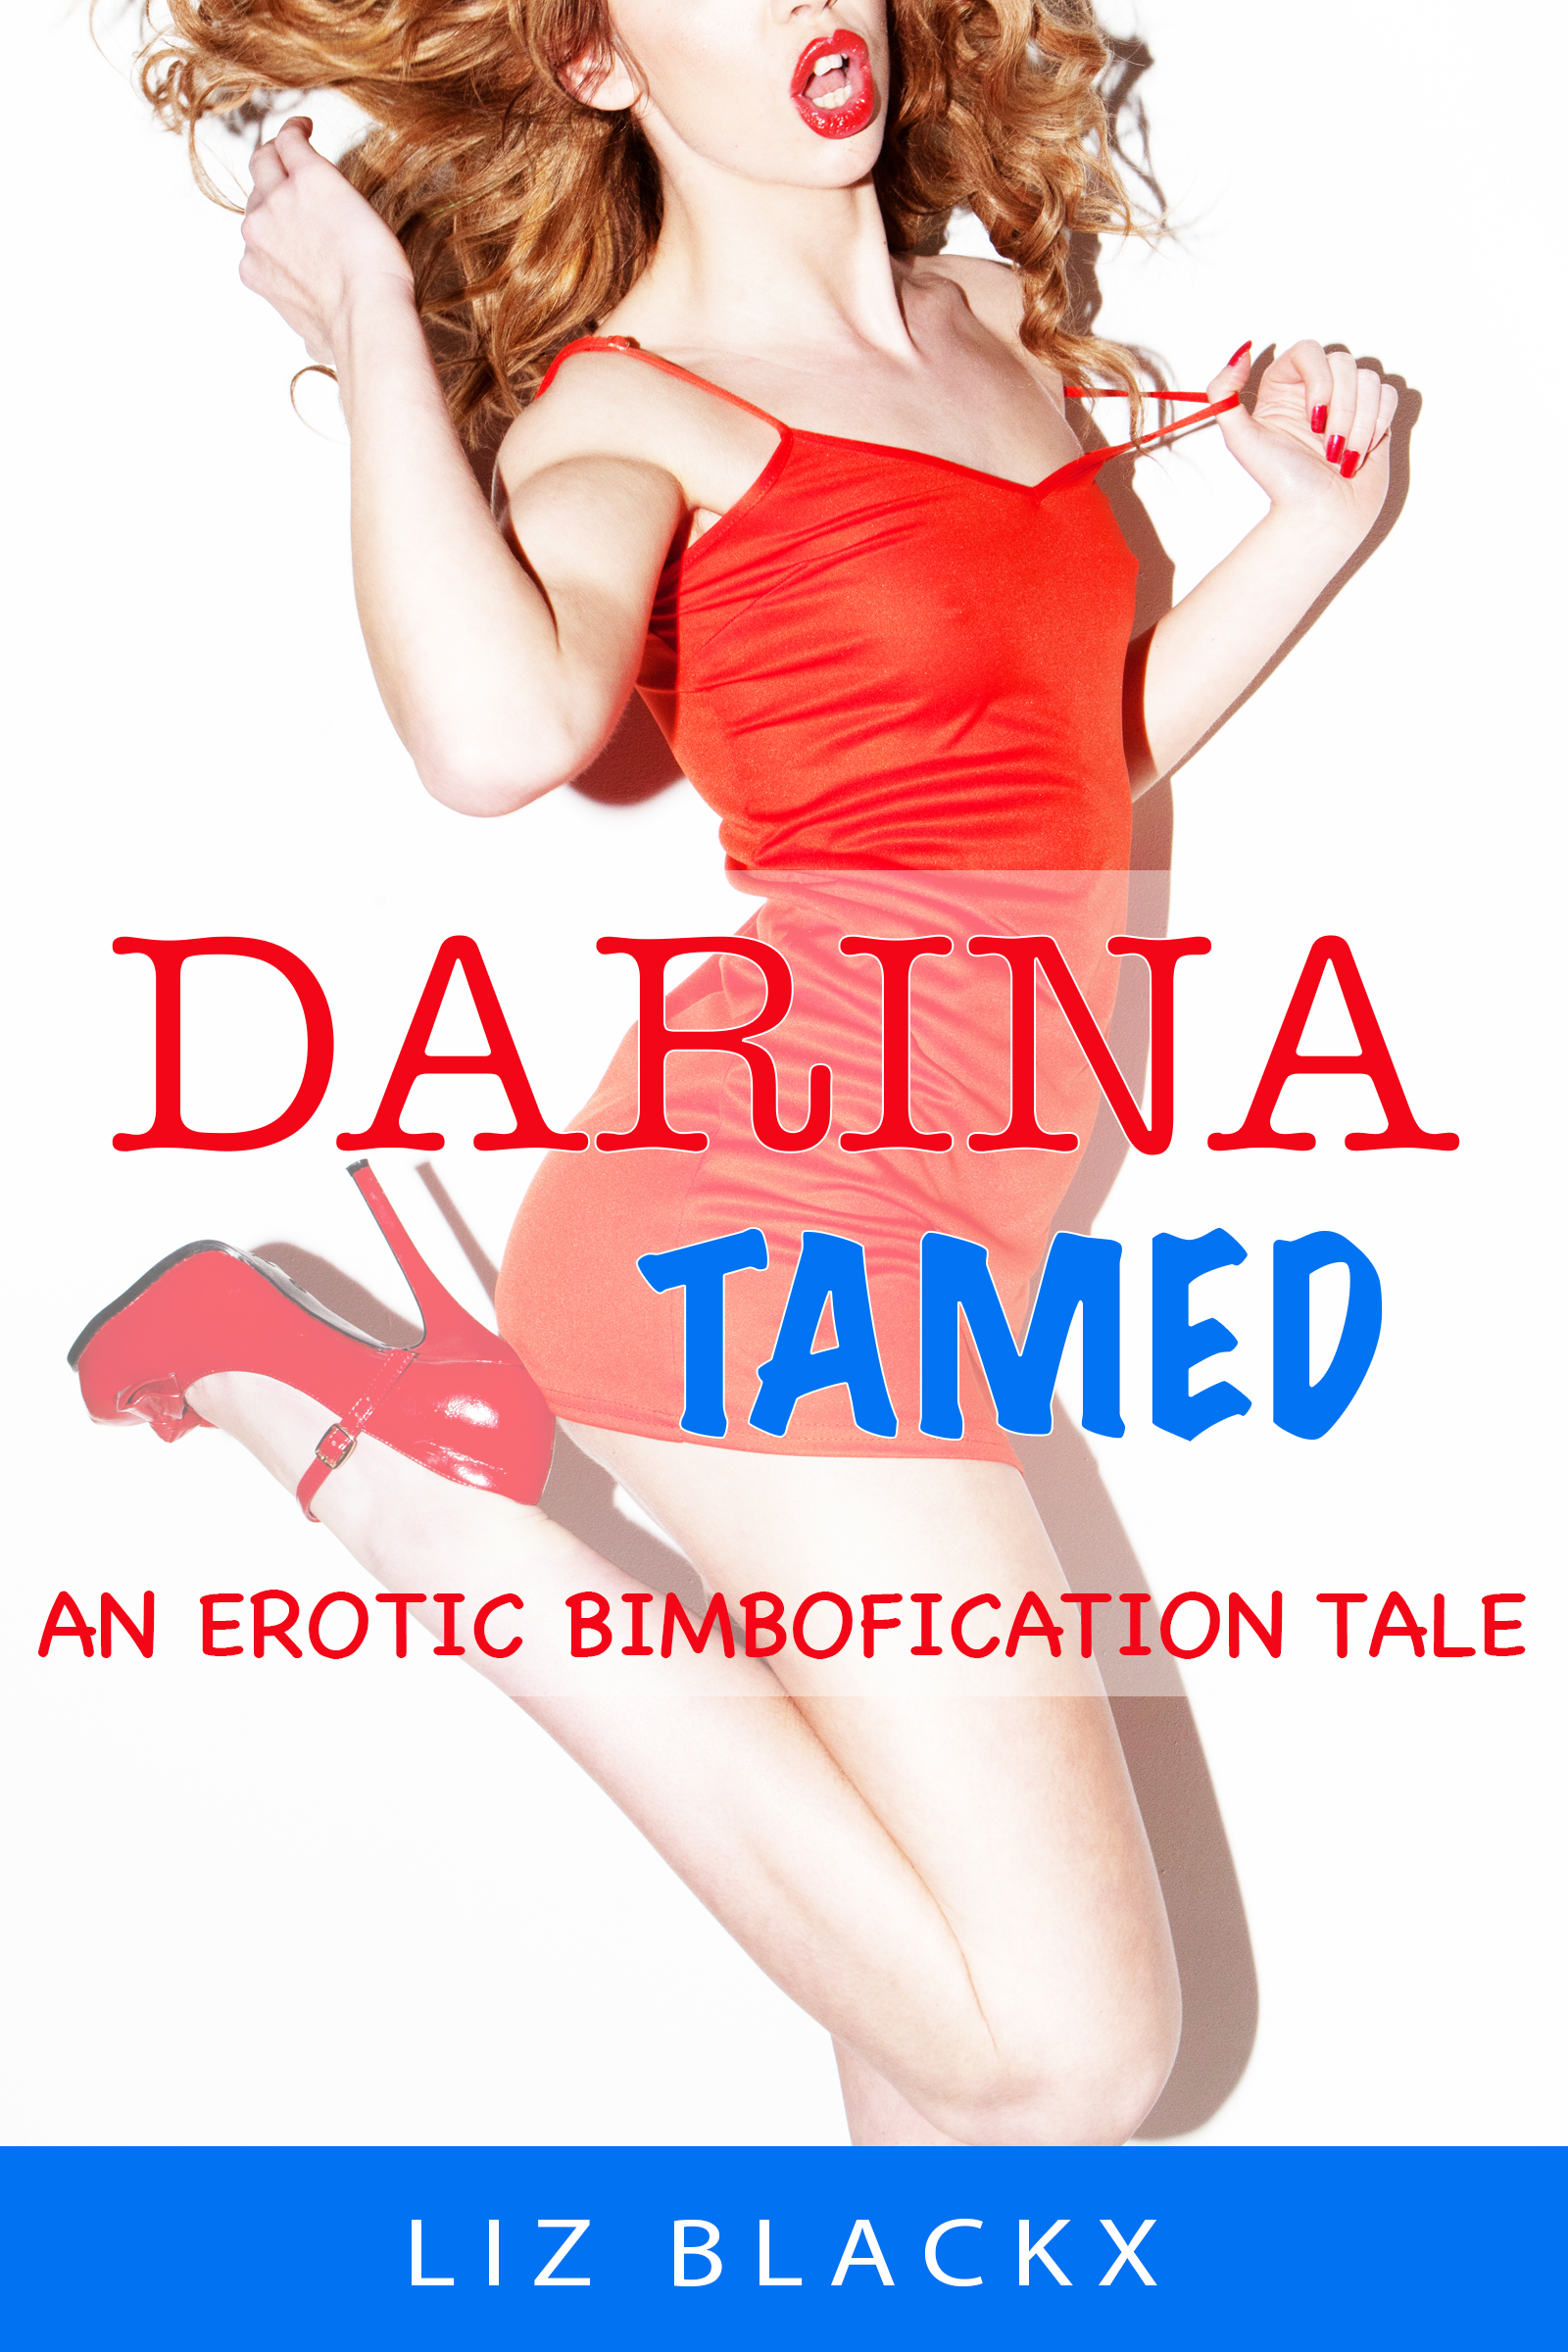 ‘Darina Tamed – An Erotic Bimbofication Tale’ is out now!